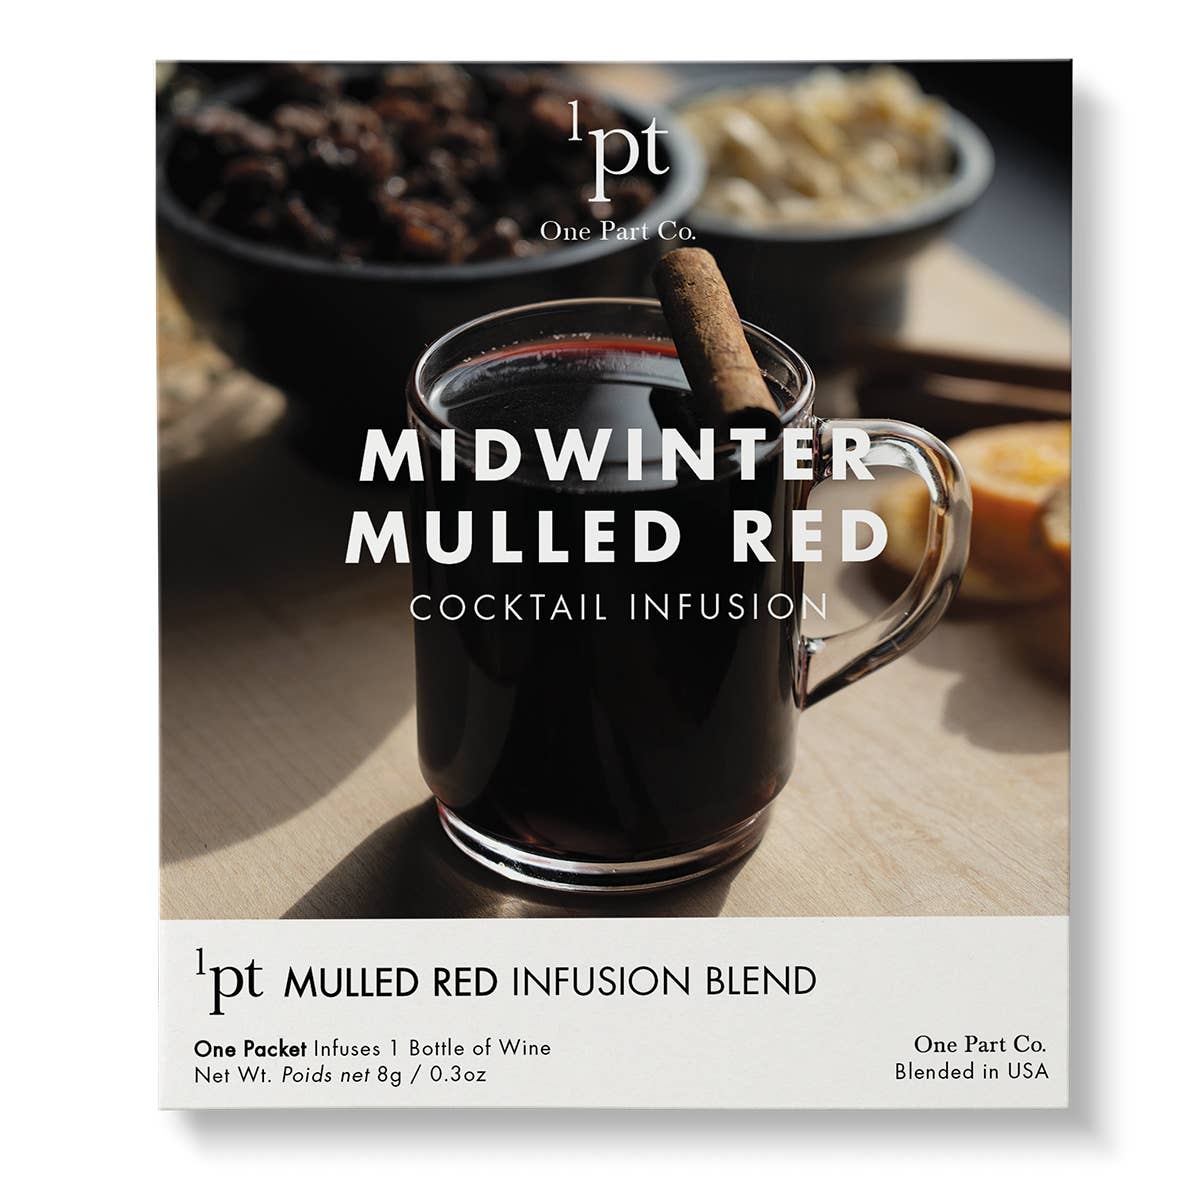 Midwinter Mulled Red Wine Cocktail Infusion Pack